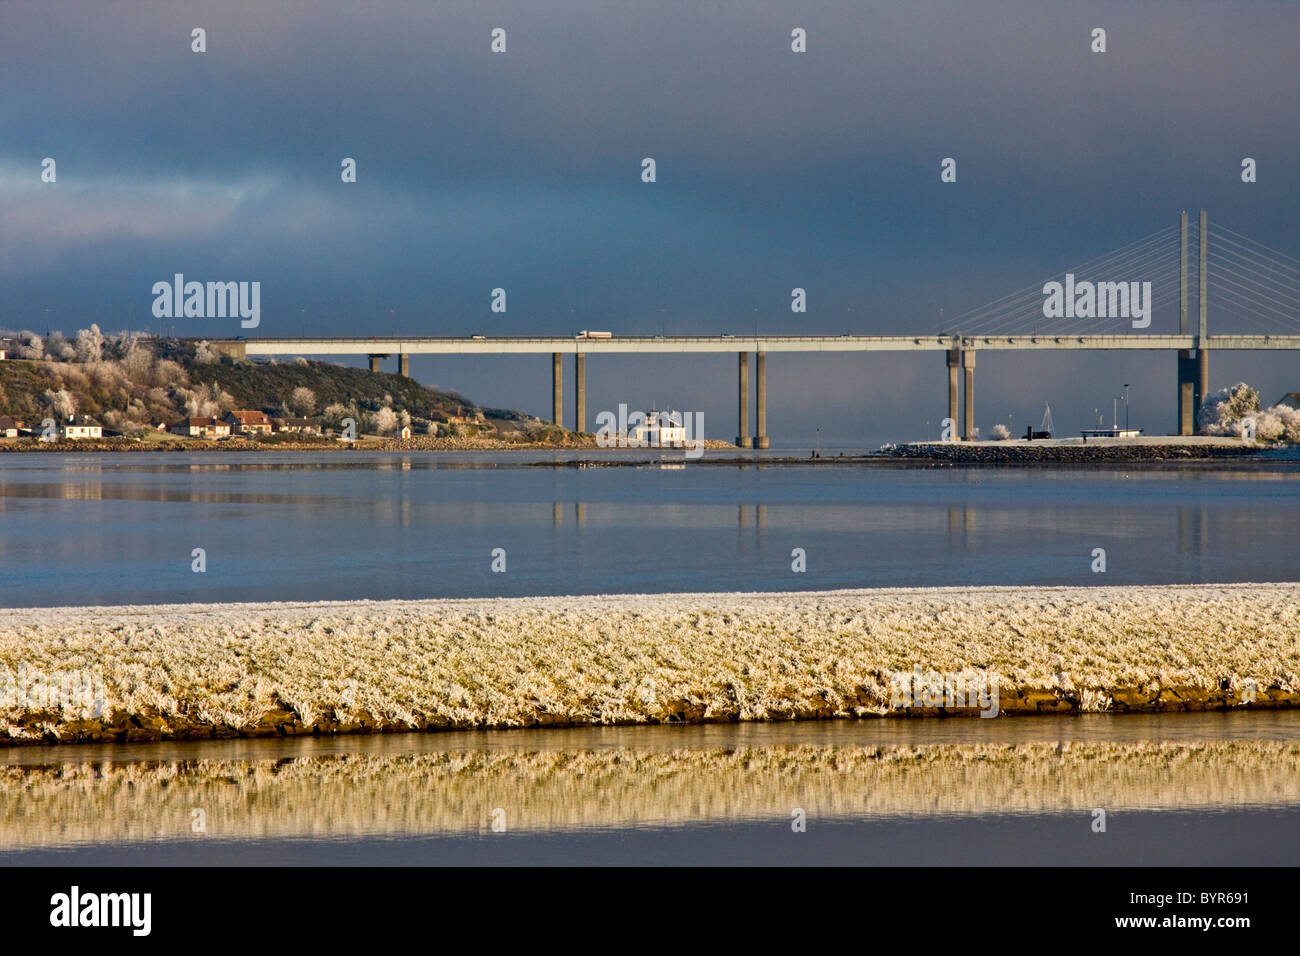 Very frosty Kessock Bridge near Inverness, from the Caledonian Canal at the Clachnaharry Sea Lock. Stock Photo